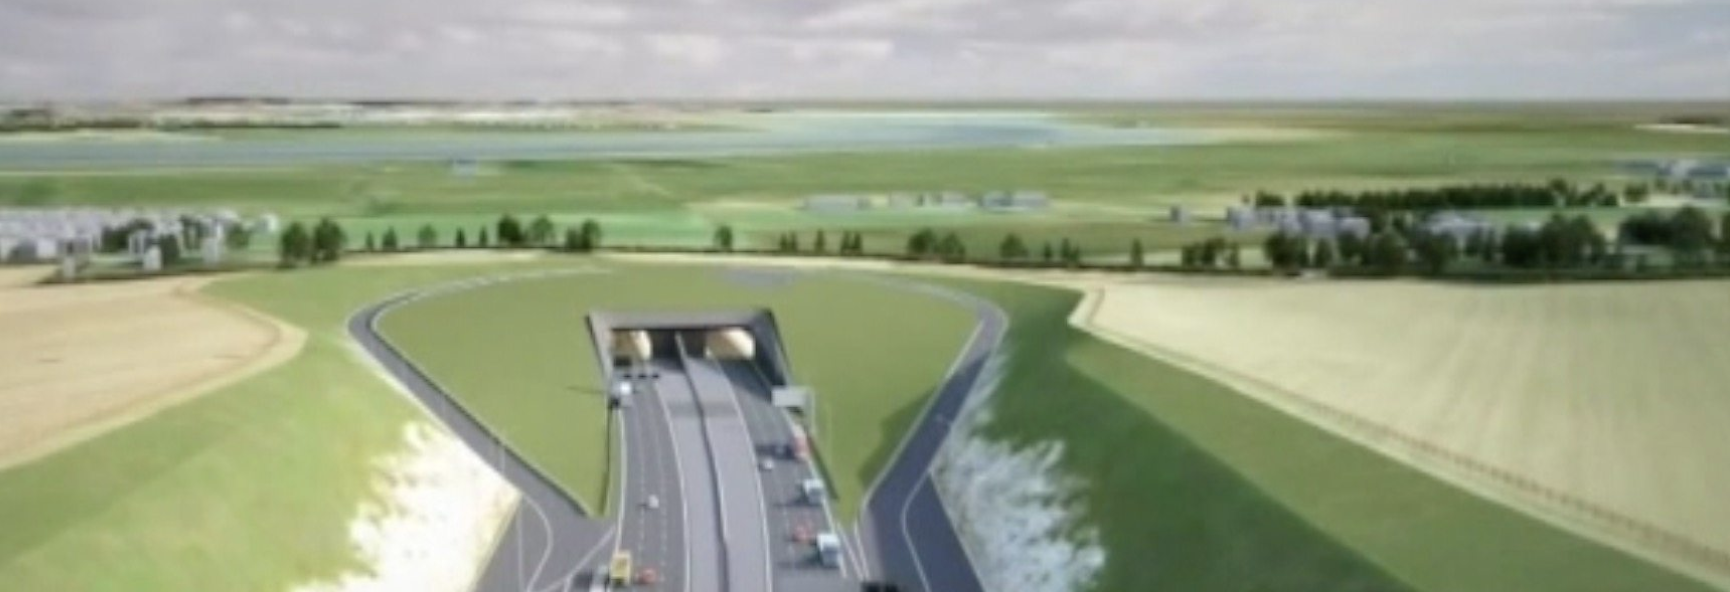 Propose virtual flyover of new Thames Lower crossing.